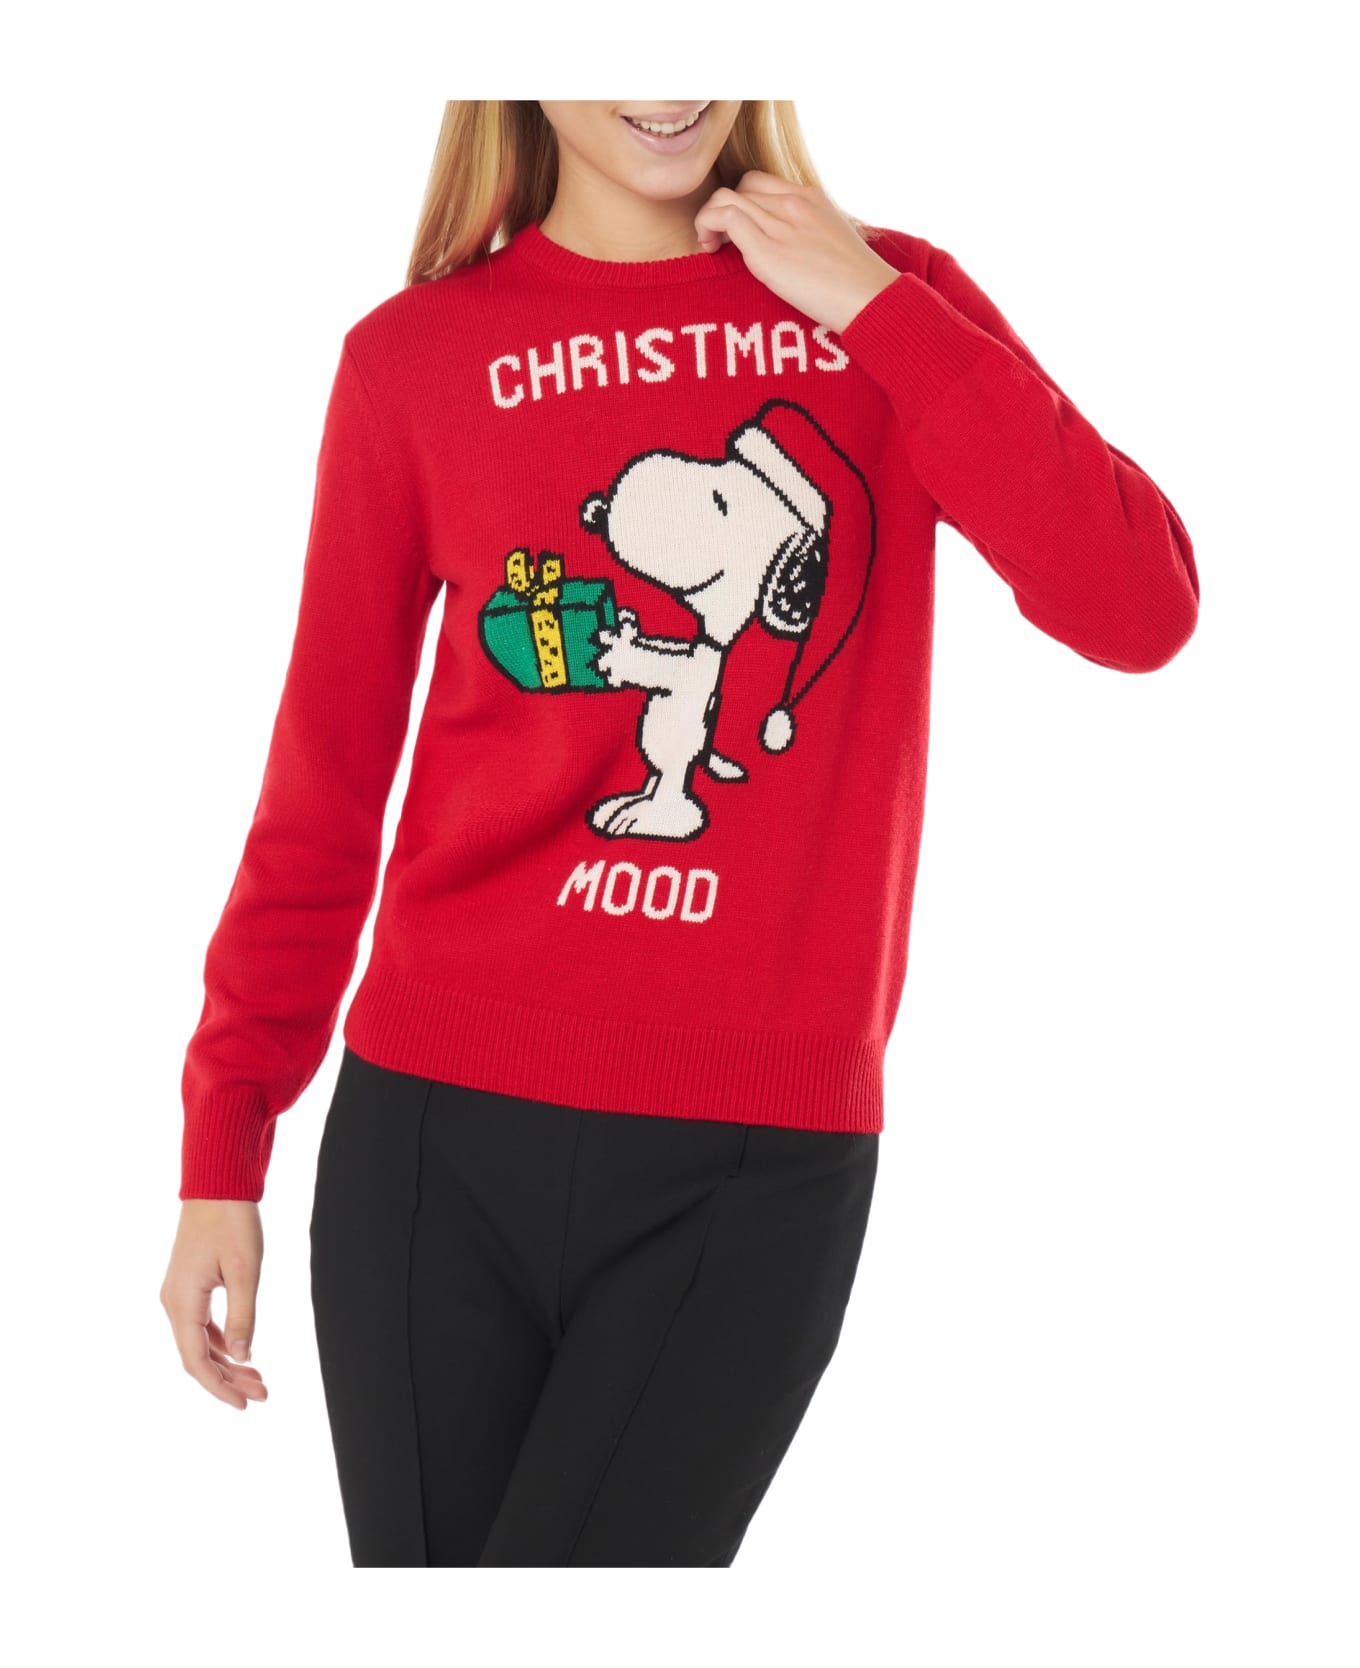 MC2 Saint Barth Snoopy Christmas Mood Print Woman Sweater | Peanuts Special Edition - RED